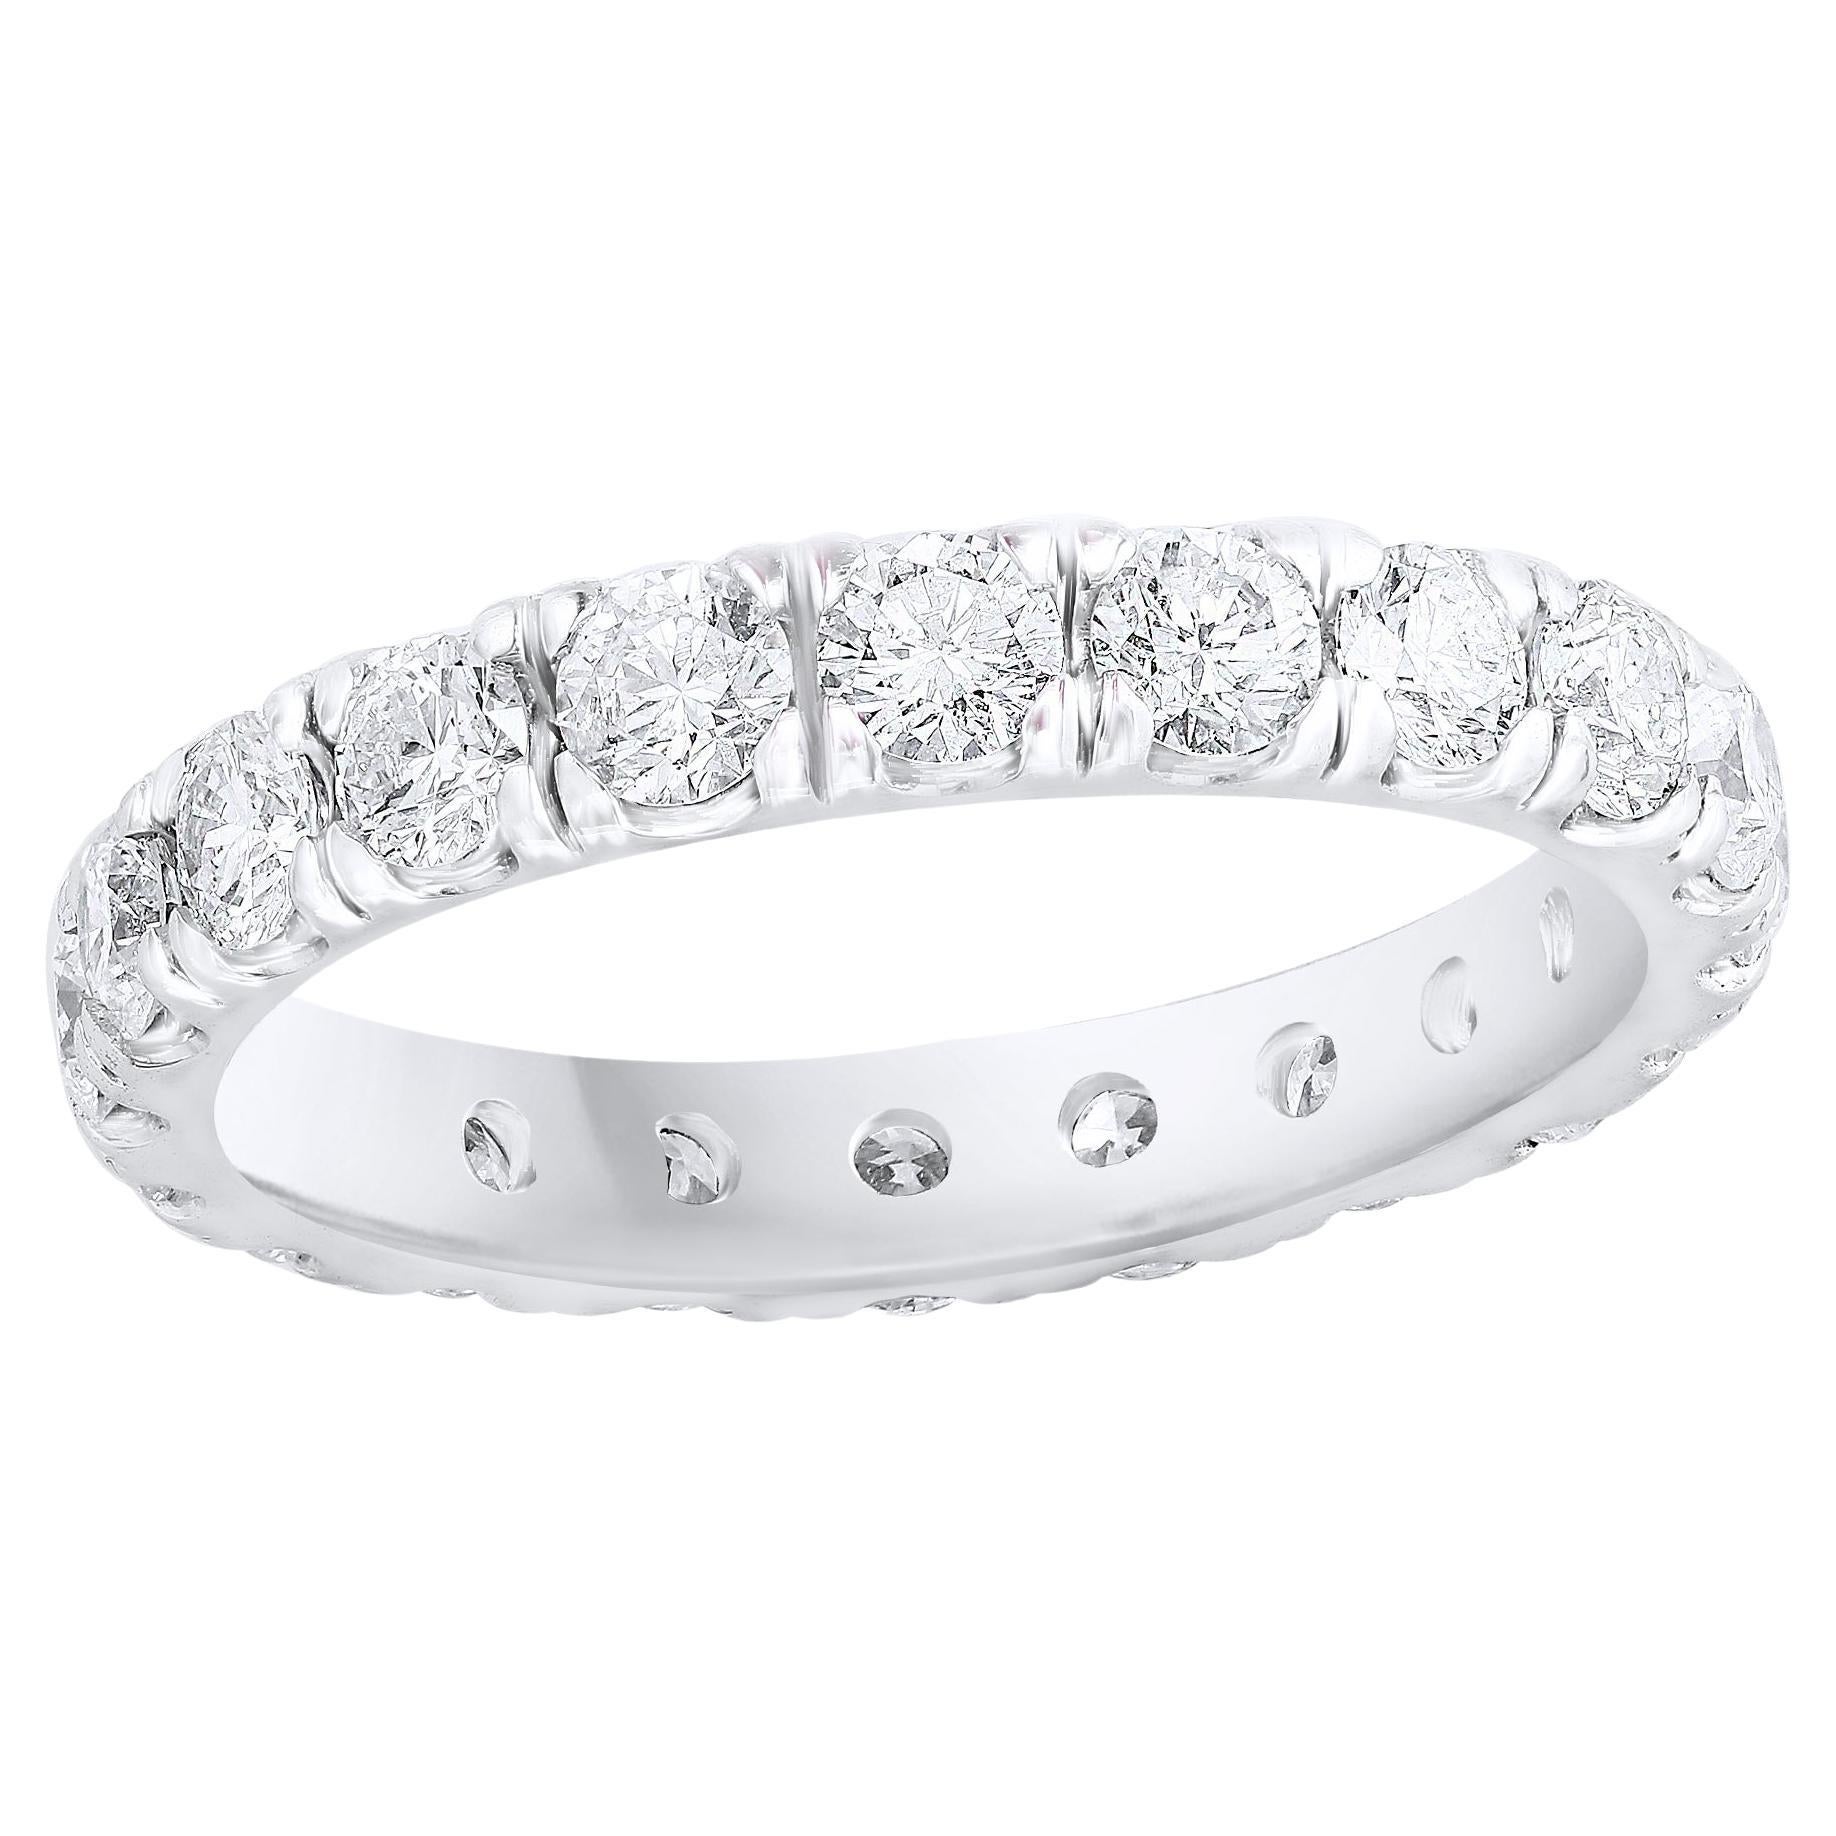 1.94 Carat Round Diamond Eternity Wedding Band in 14K White Gold For Sale